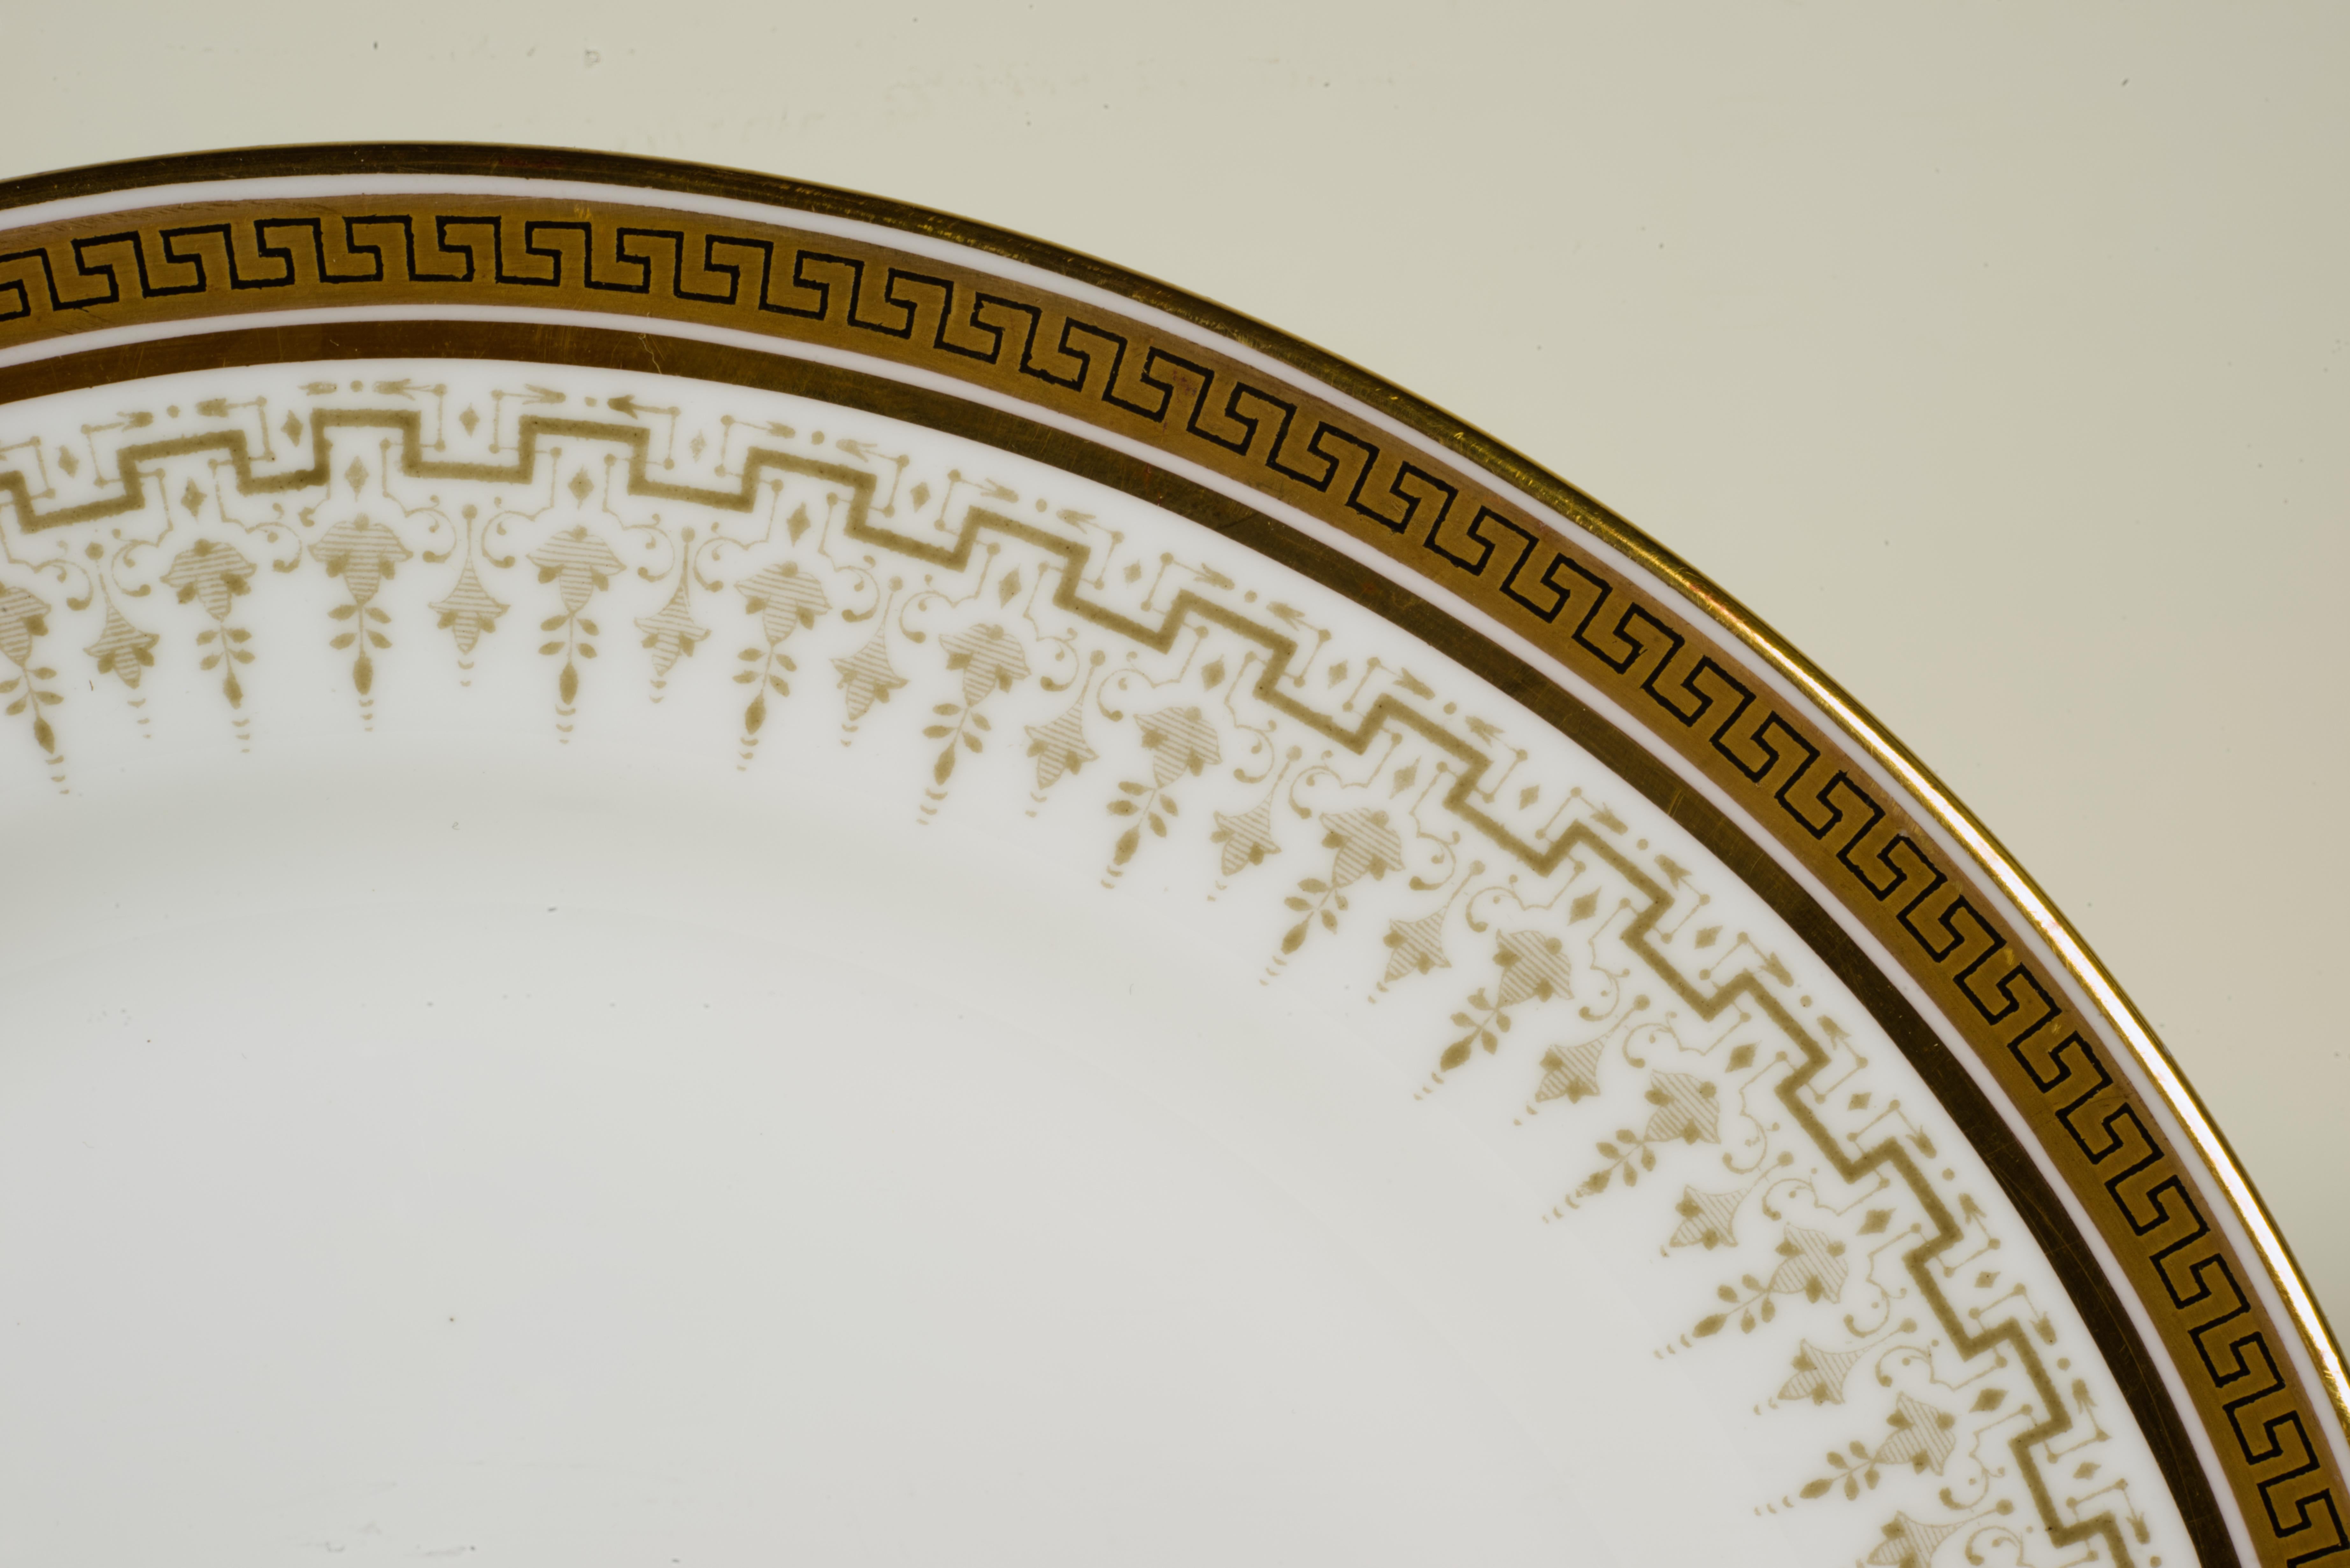 Cauldon set of 6 luncheon plates in H8413 pattern, 1904-1915 In Good Condition For Sale In Clifton Springs, NY